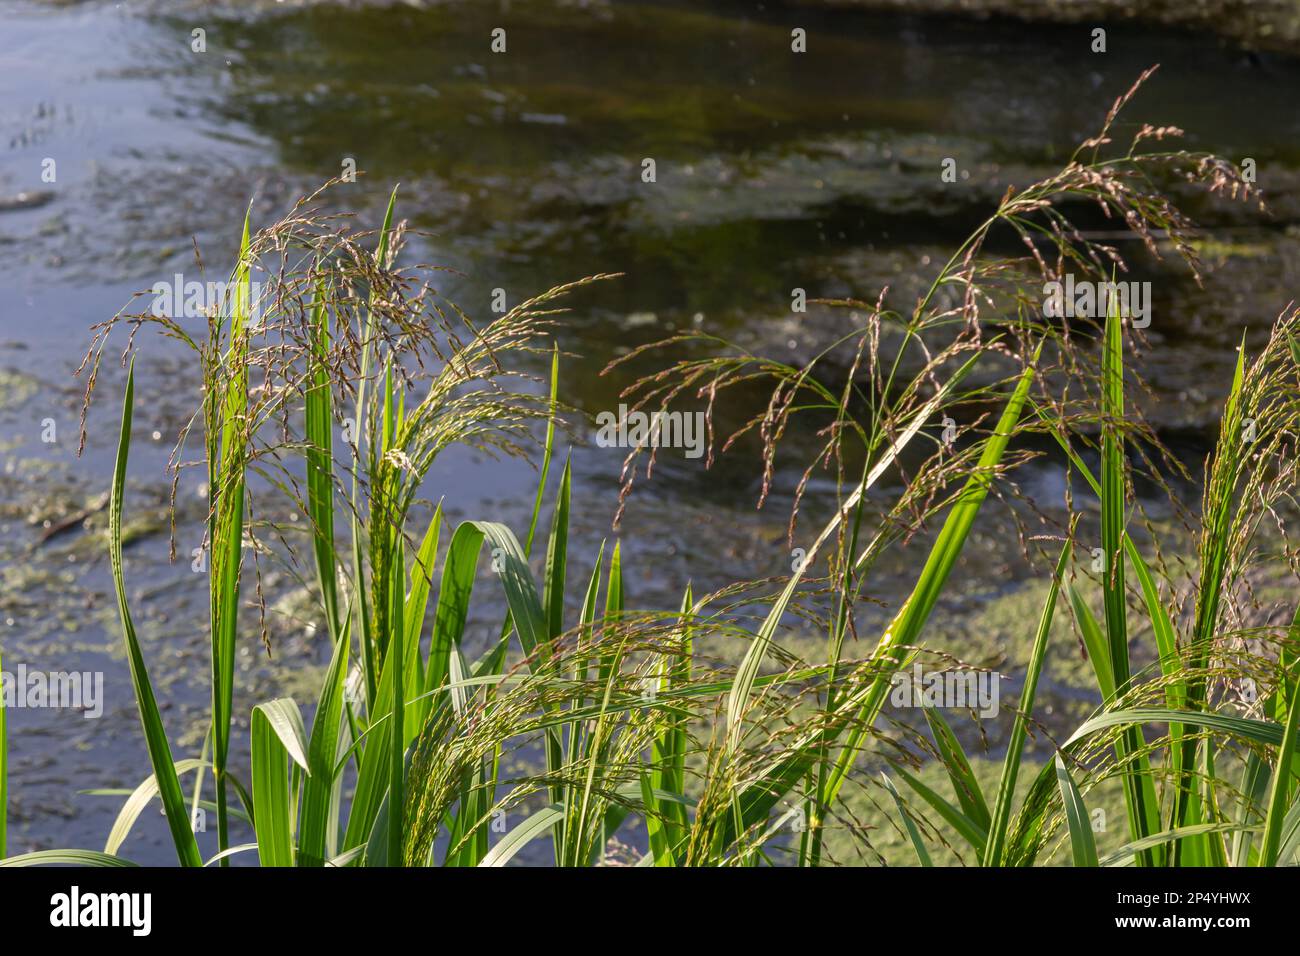 weeds in paddy field, sedges against the background of the river on a sunny day in the natural environment. Stock Photo